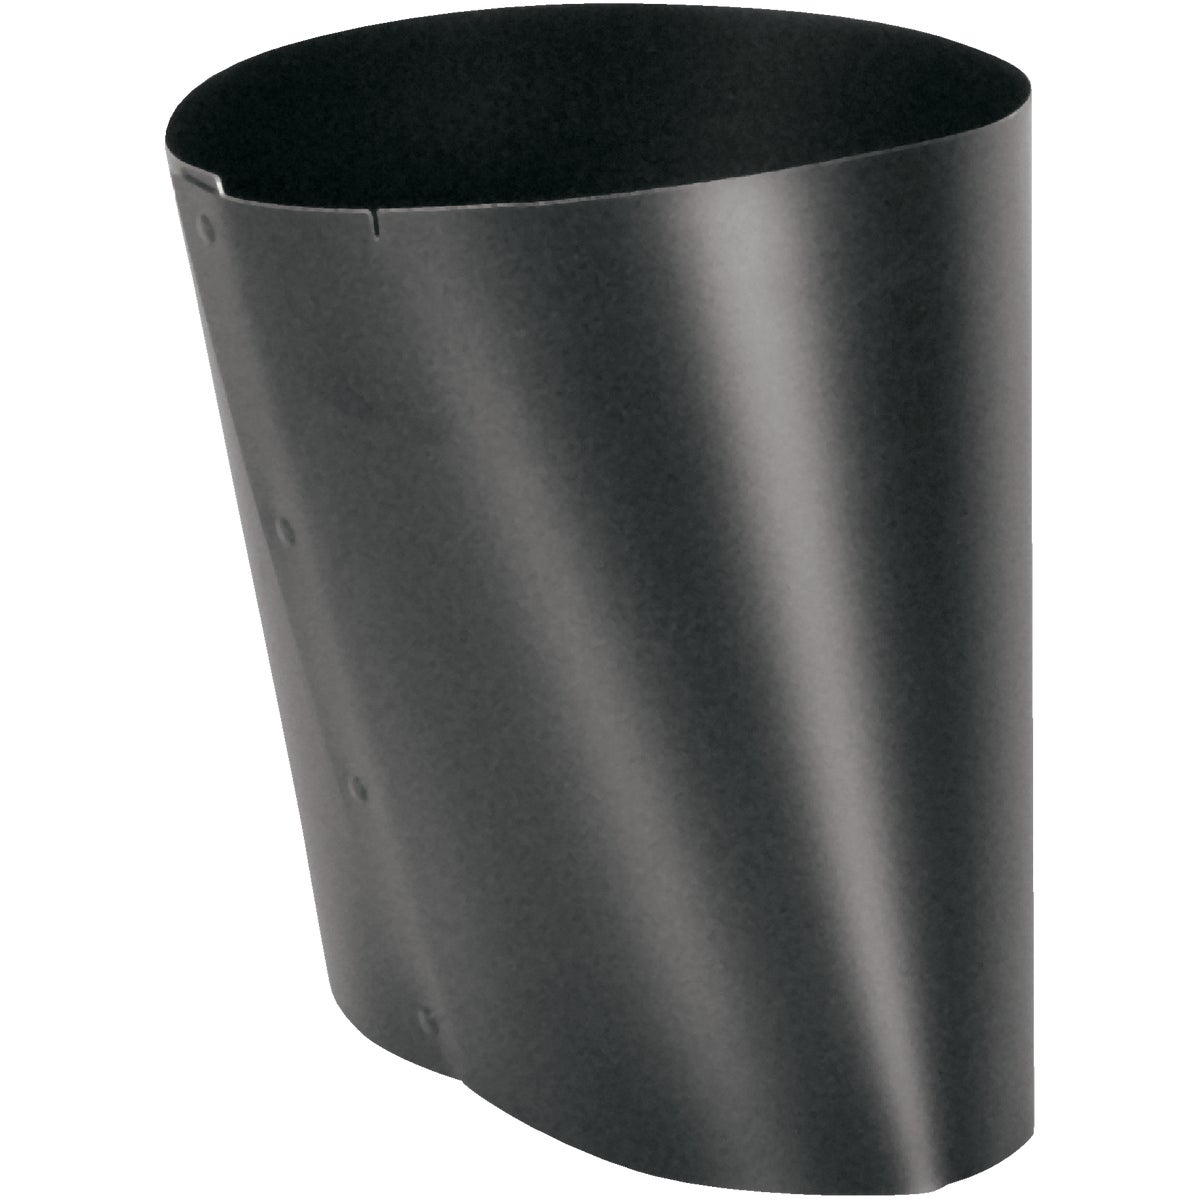 Item 492299, For use with solid fuel appliances such as wood stoves.